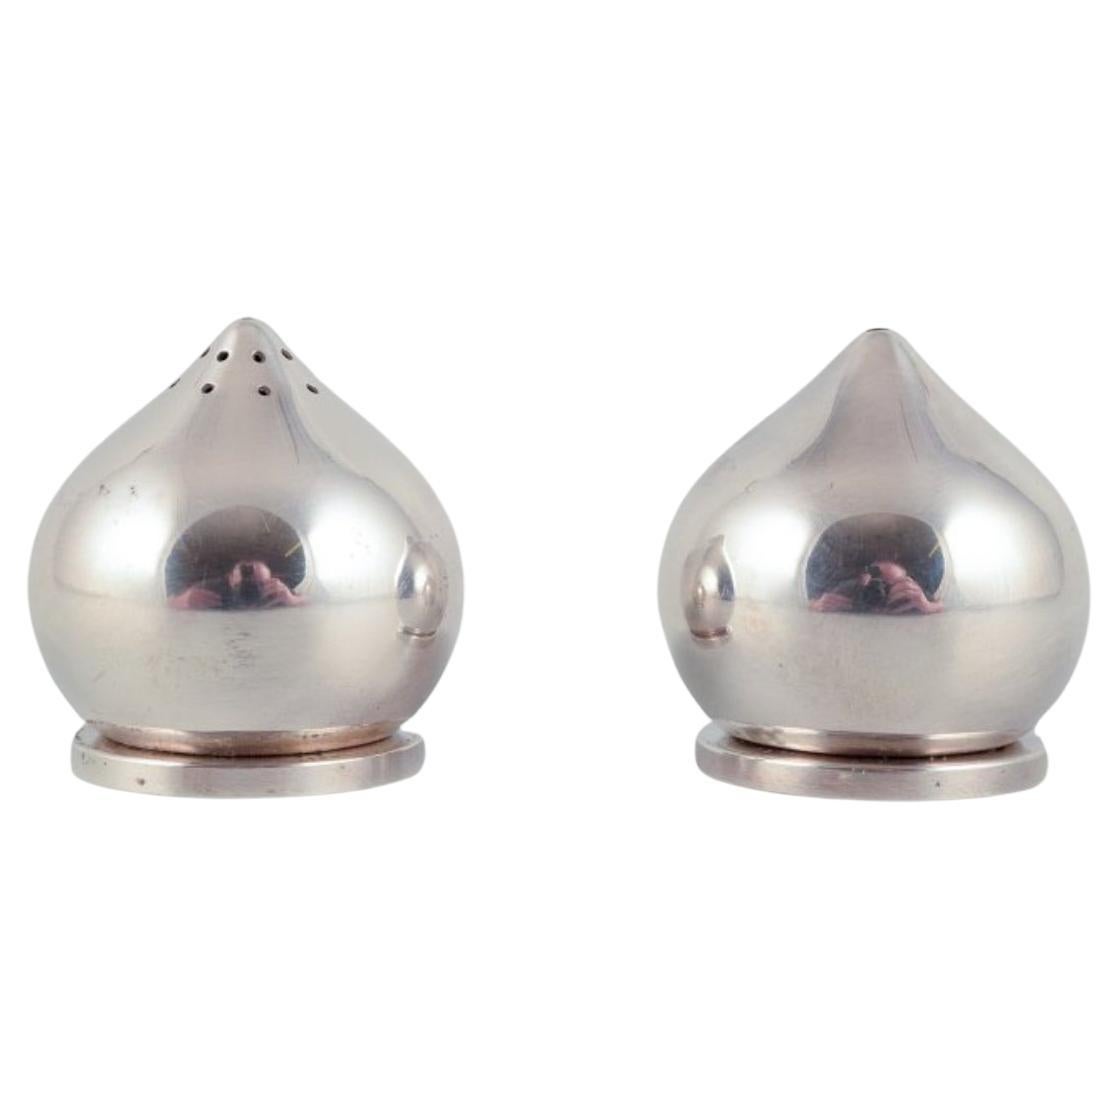 Aage Weimar, Danish silversmith.  Pair of modernist salt and pepper shakers. For Sale